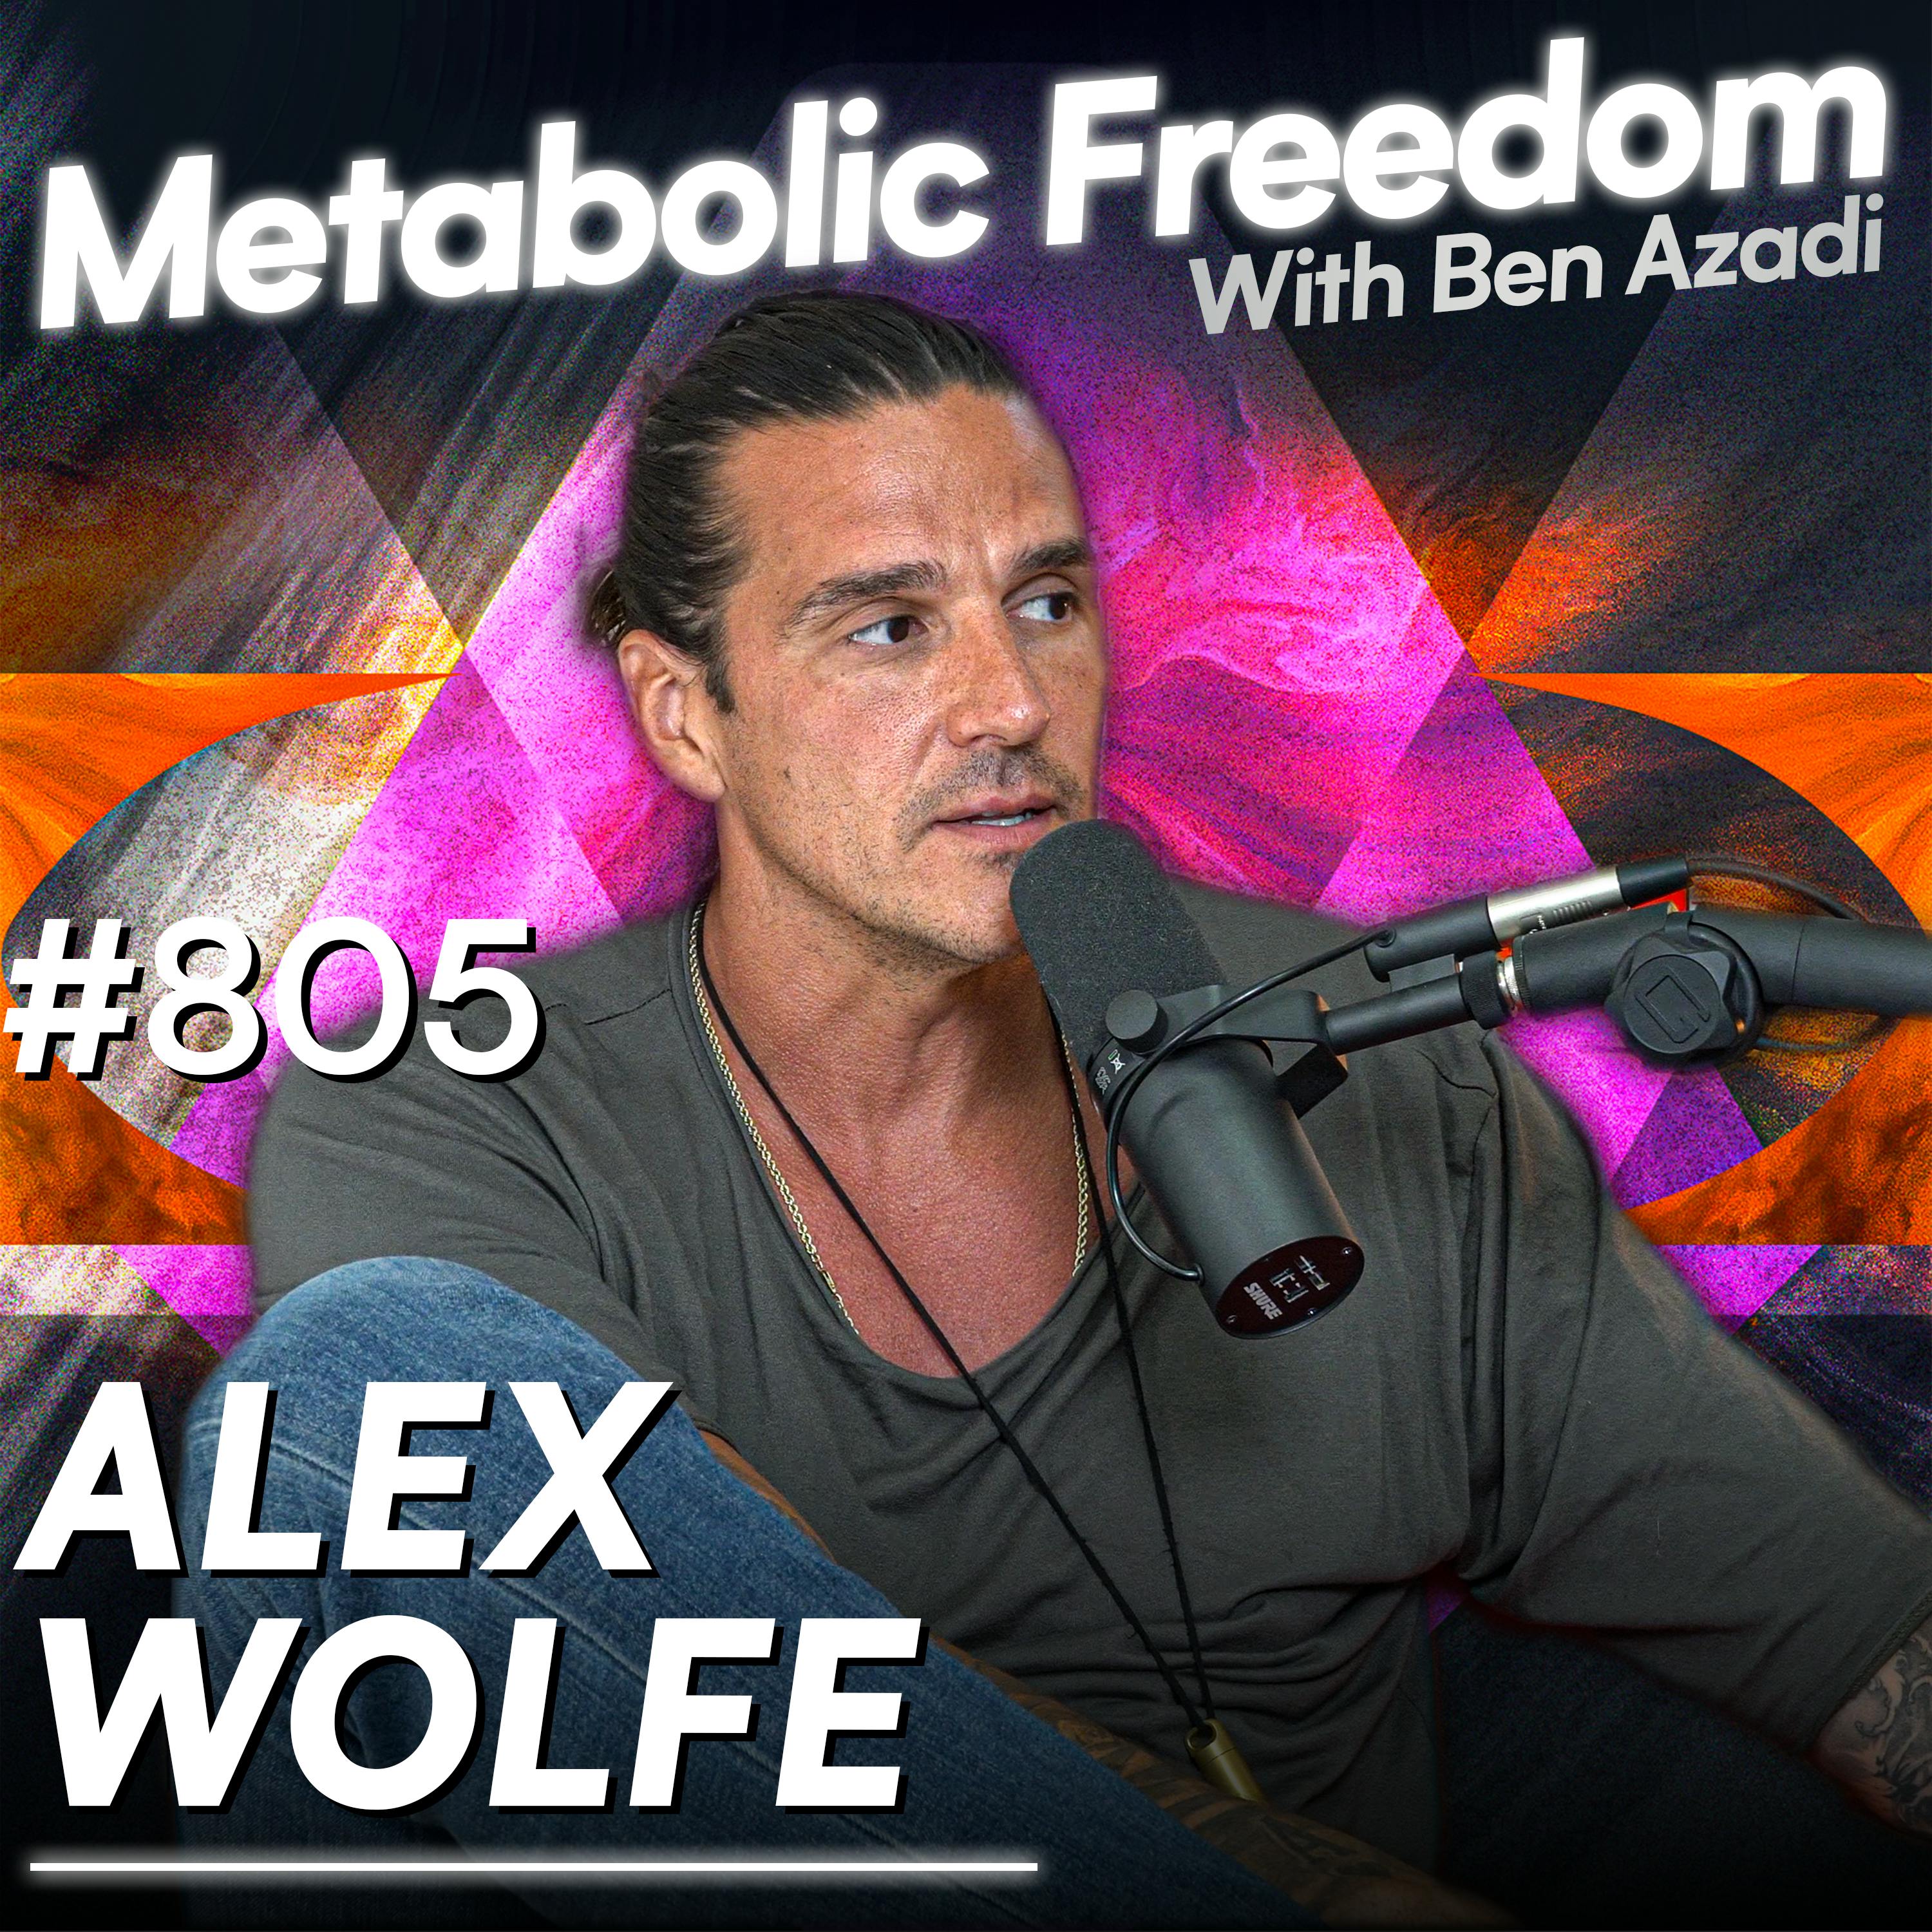 #805 The Incredible Power of Mushrooms: Alex Wolfe’s Shocking Journey to Ultimate Wellness Through Microdosing Psychedelics